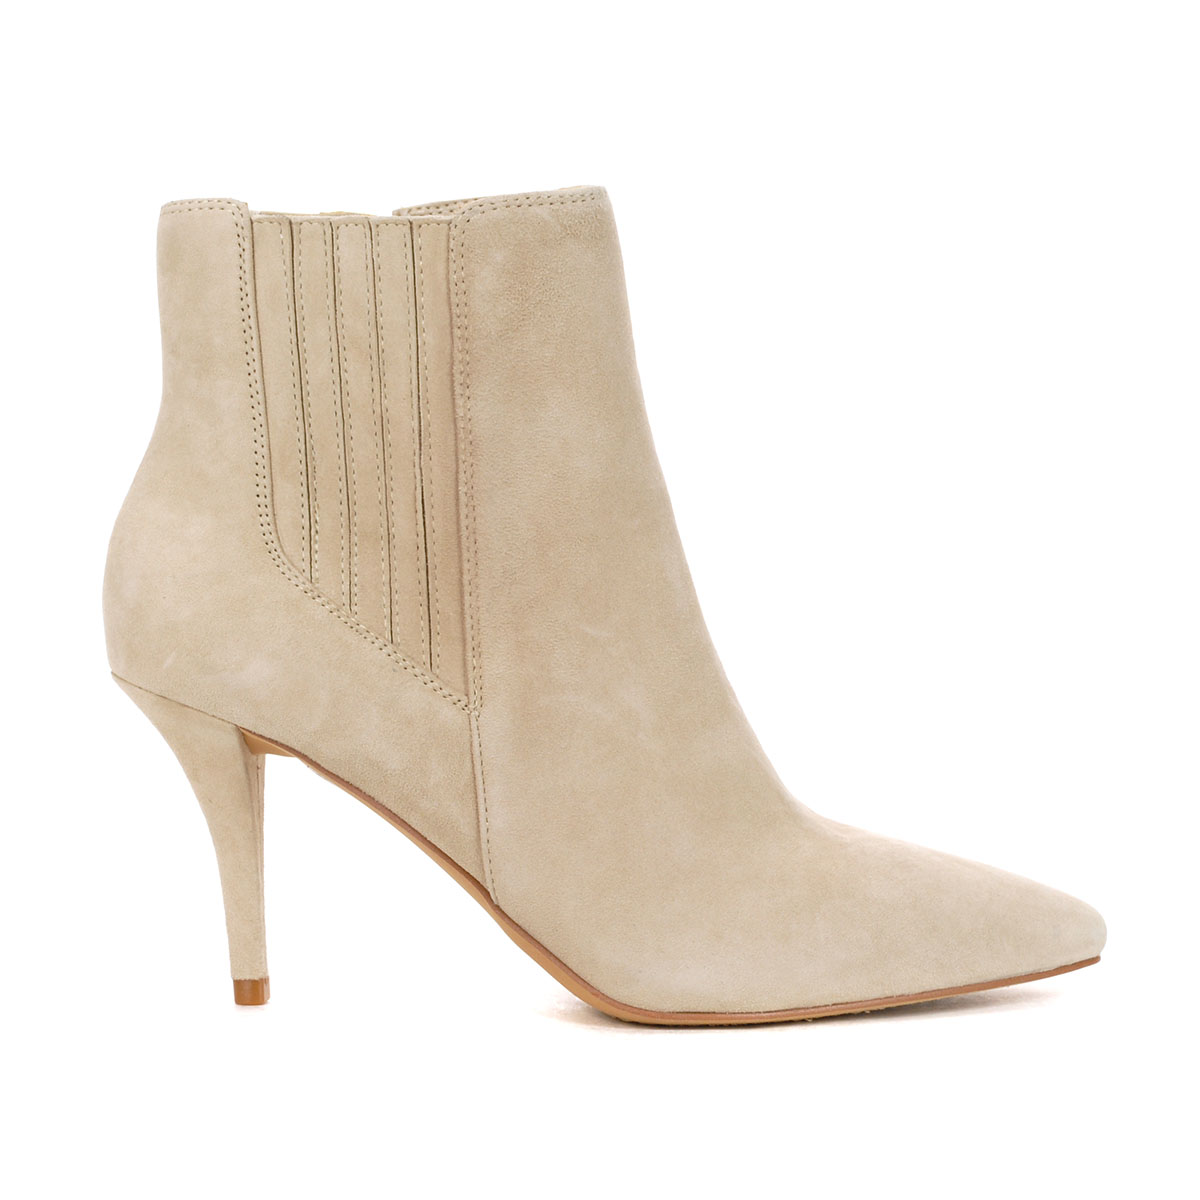 Vince Camuto Pailey Suede Booties